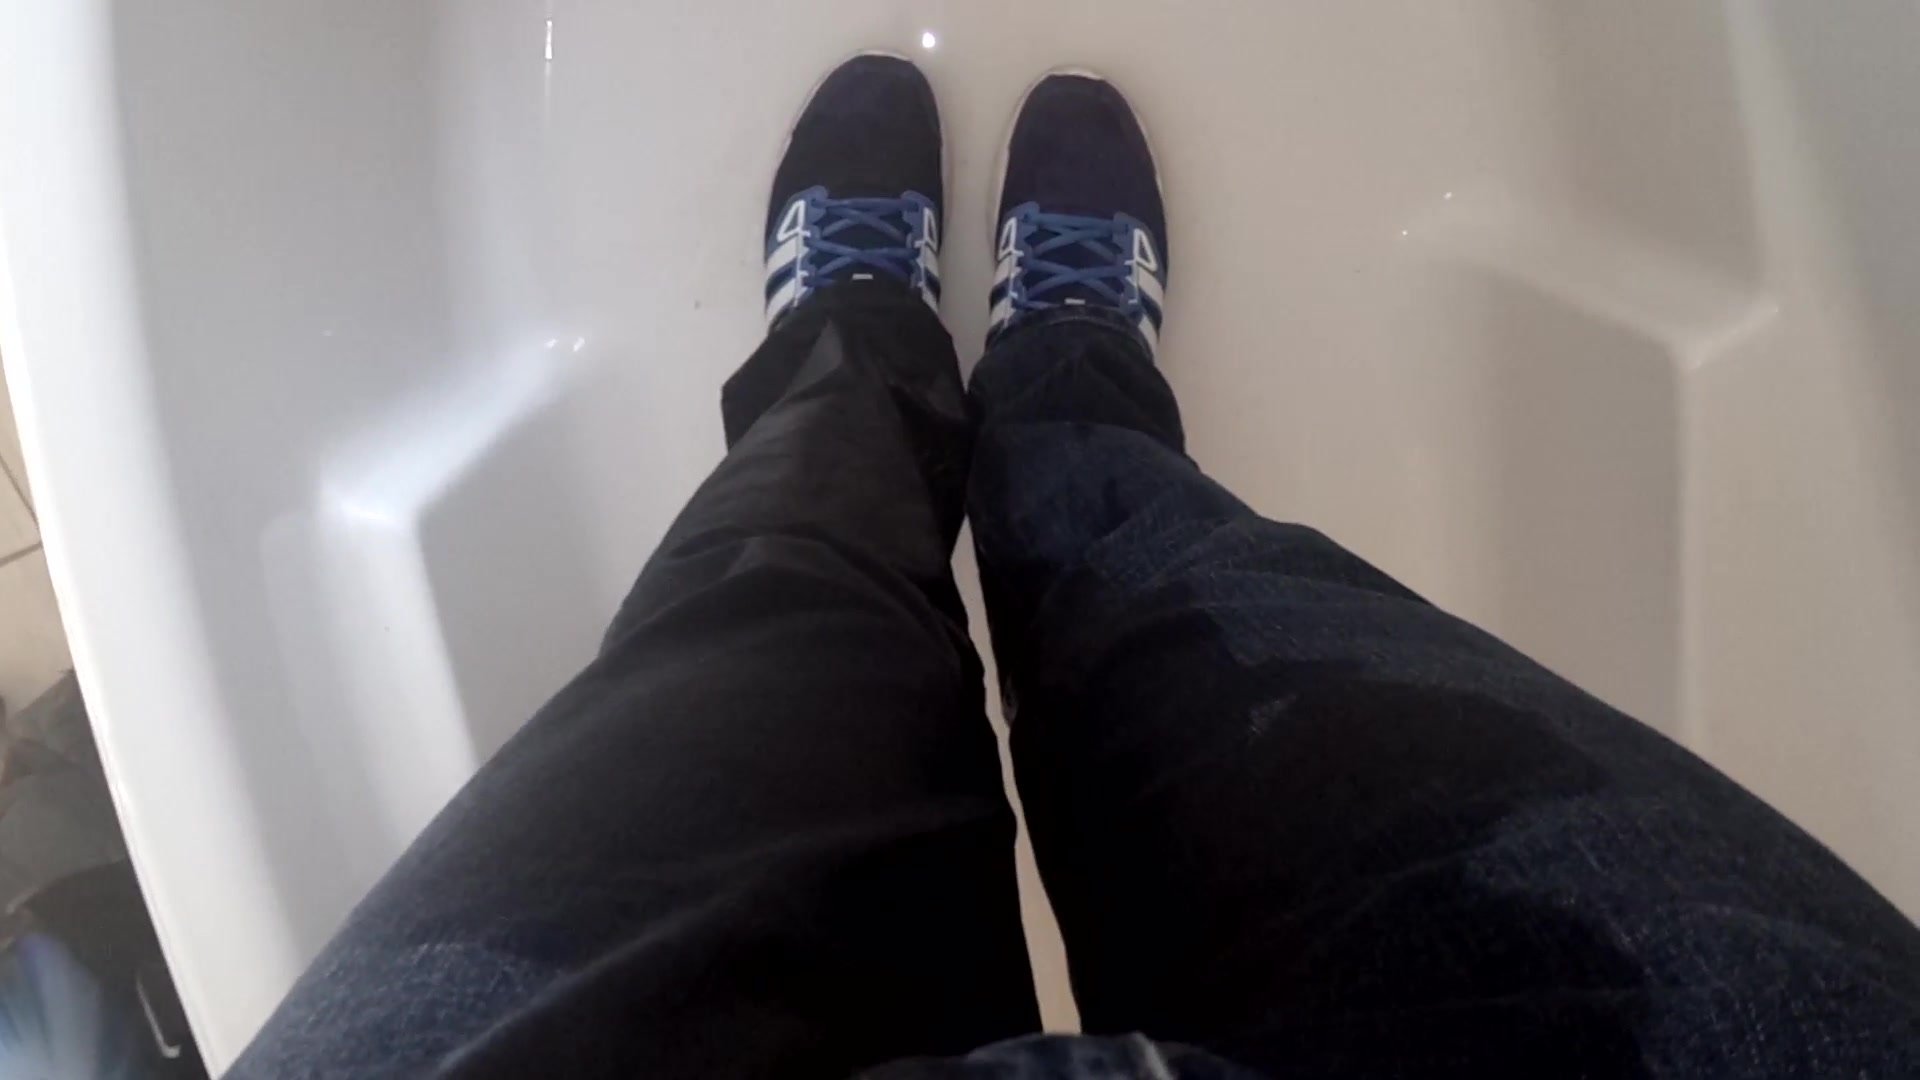 Piss and bath in dark jeans and Adidas sneakers 08.07.17